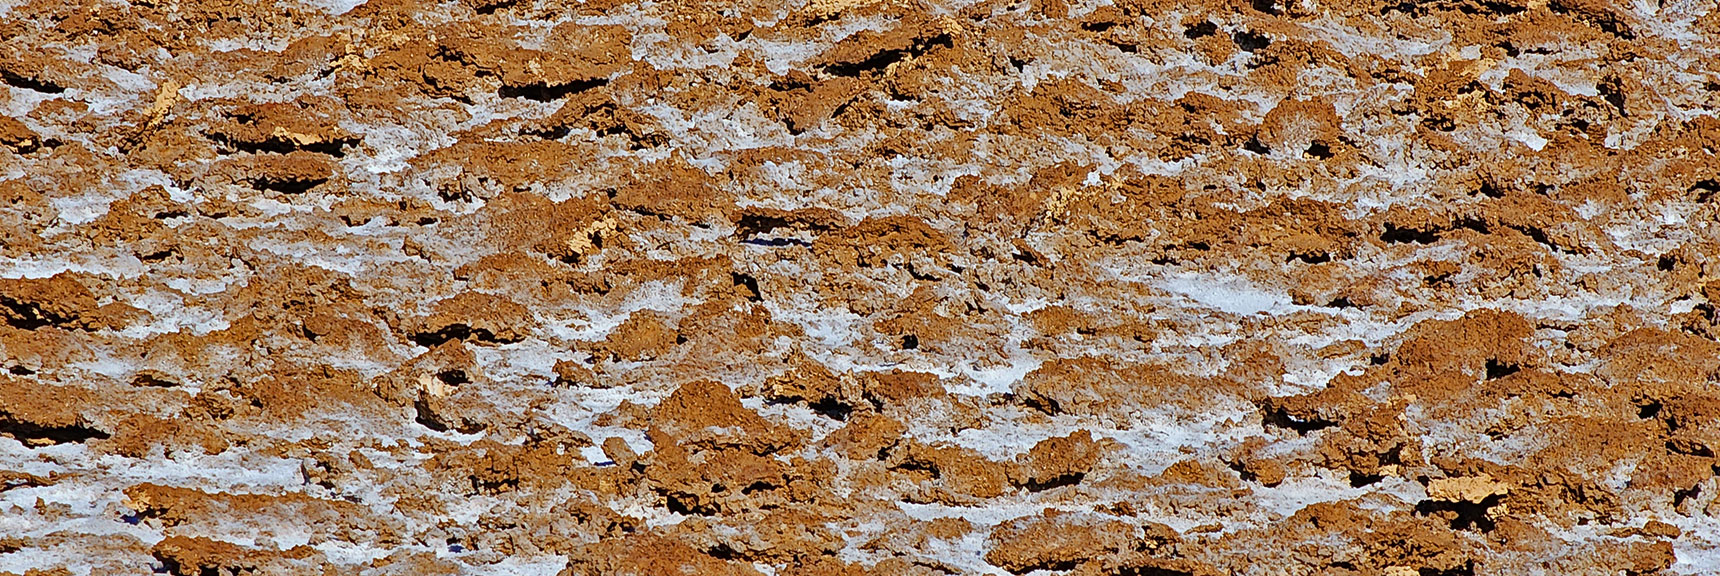 Rough Surface is Due to Salts Pushing Upward from Beneath | Death Valley Crossing | Death Valley National Park, California | David Smith | LasVegasAreaTrails.com